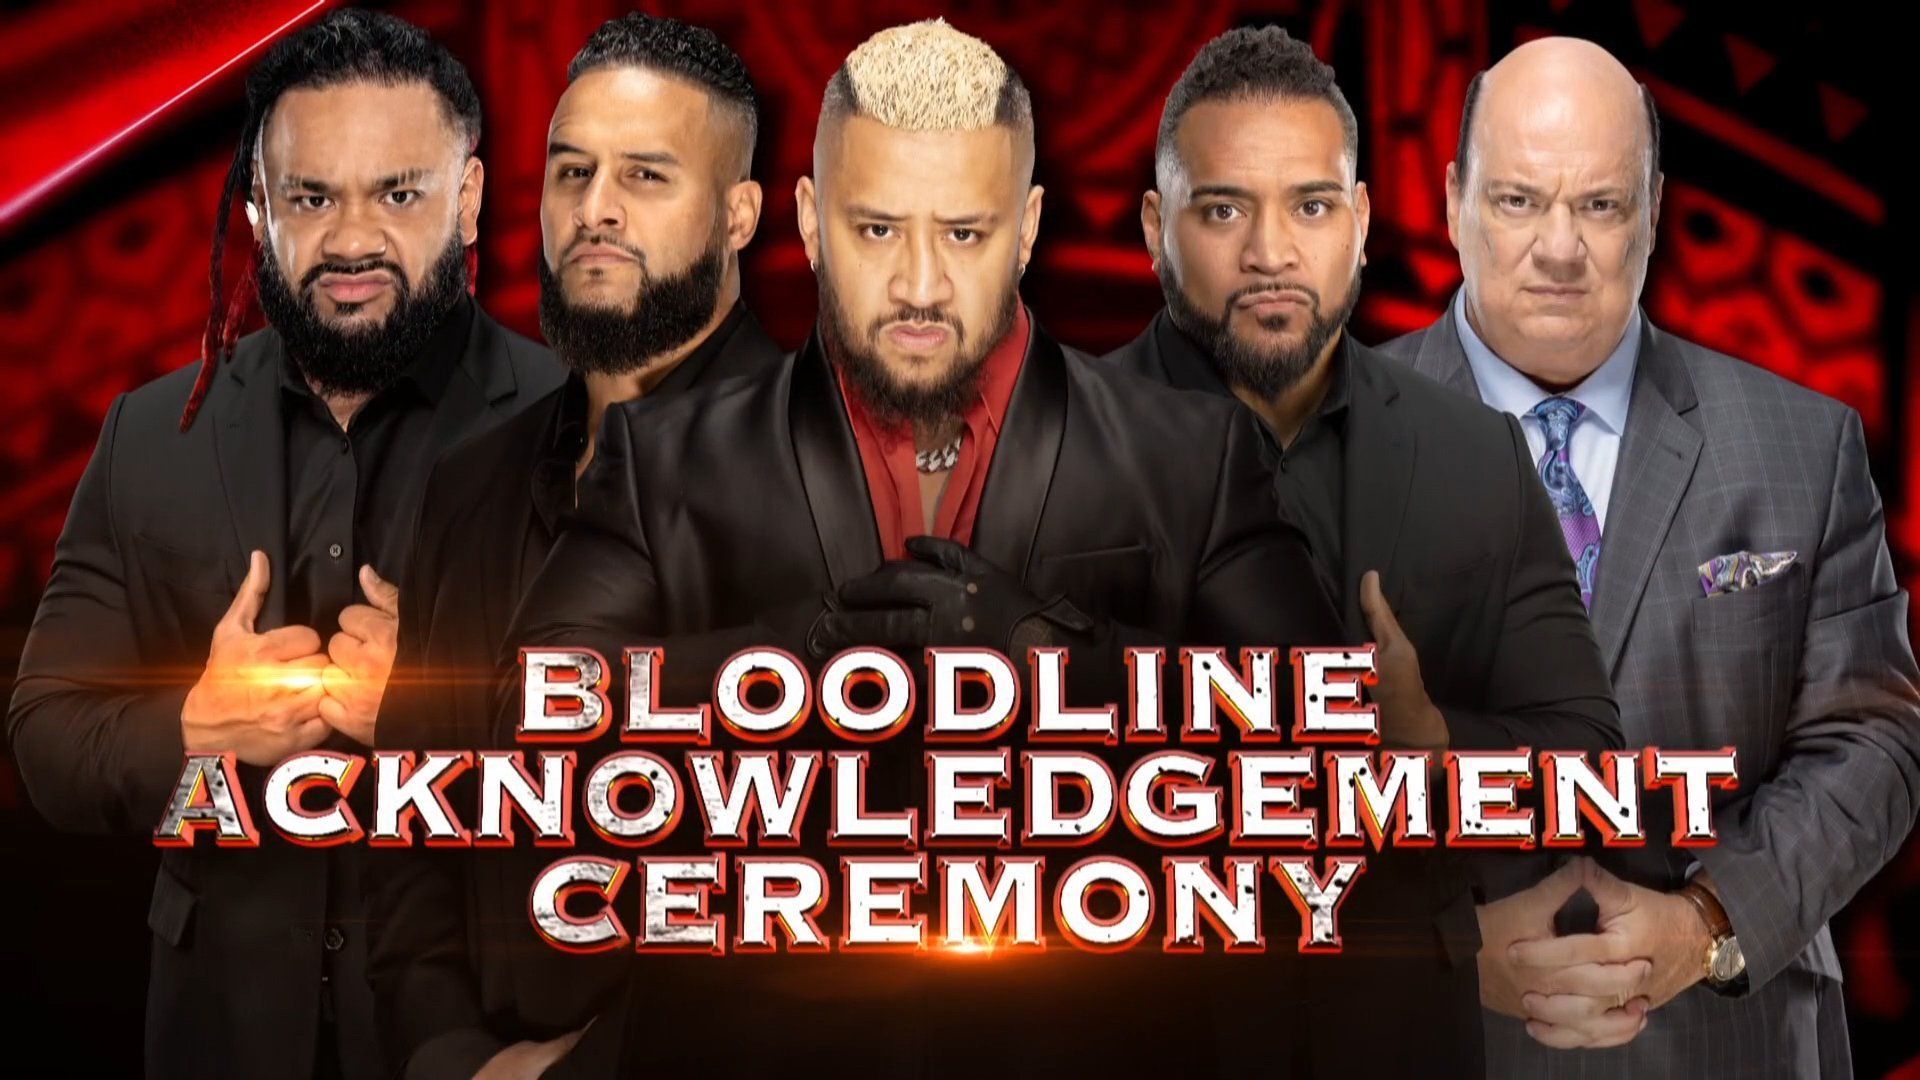 Jacob Fatu was the latest star to join the new-look Bloodline. [Image credit: WWE Twitter]